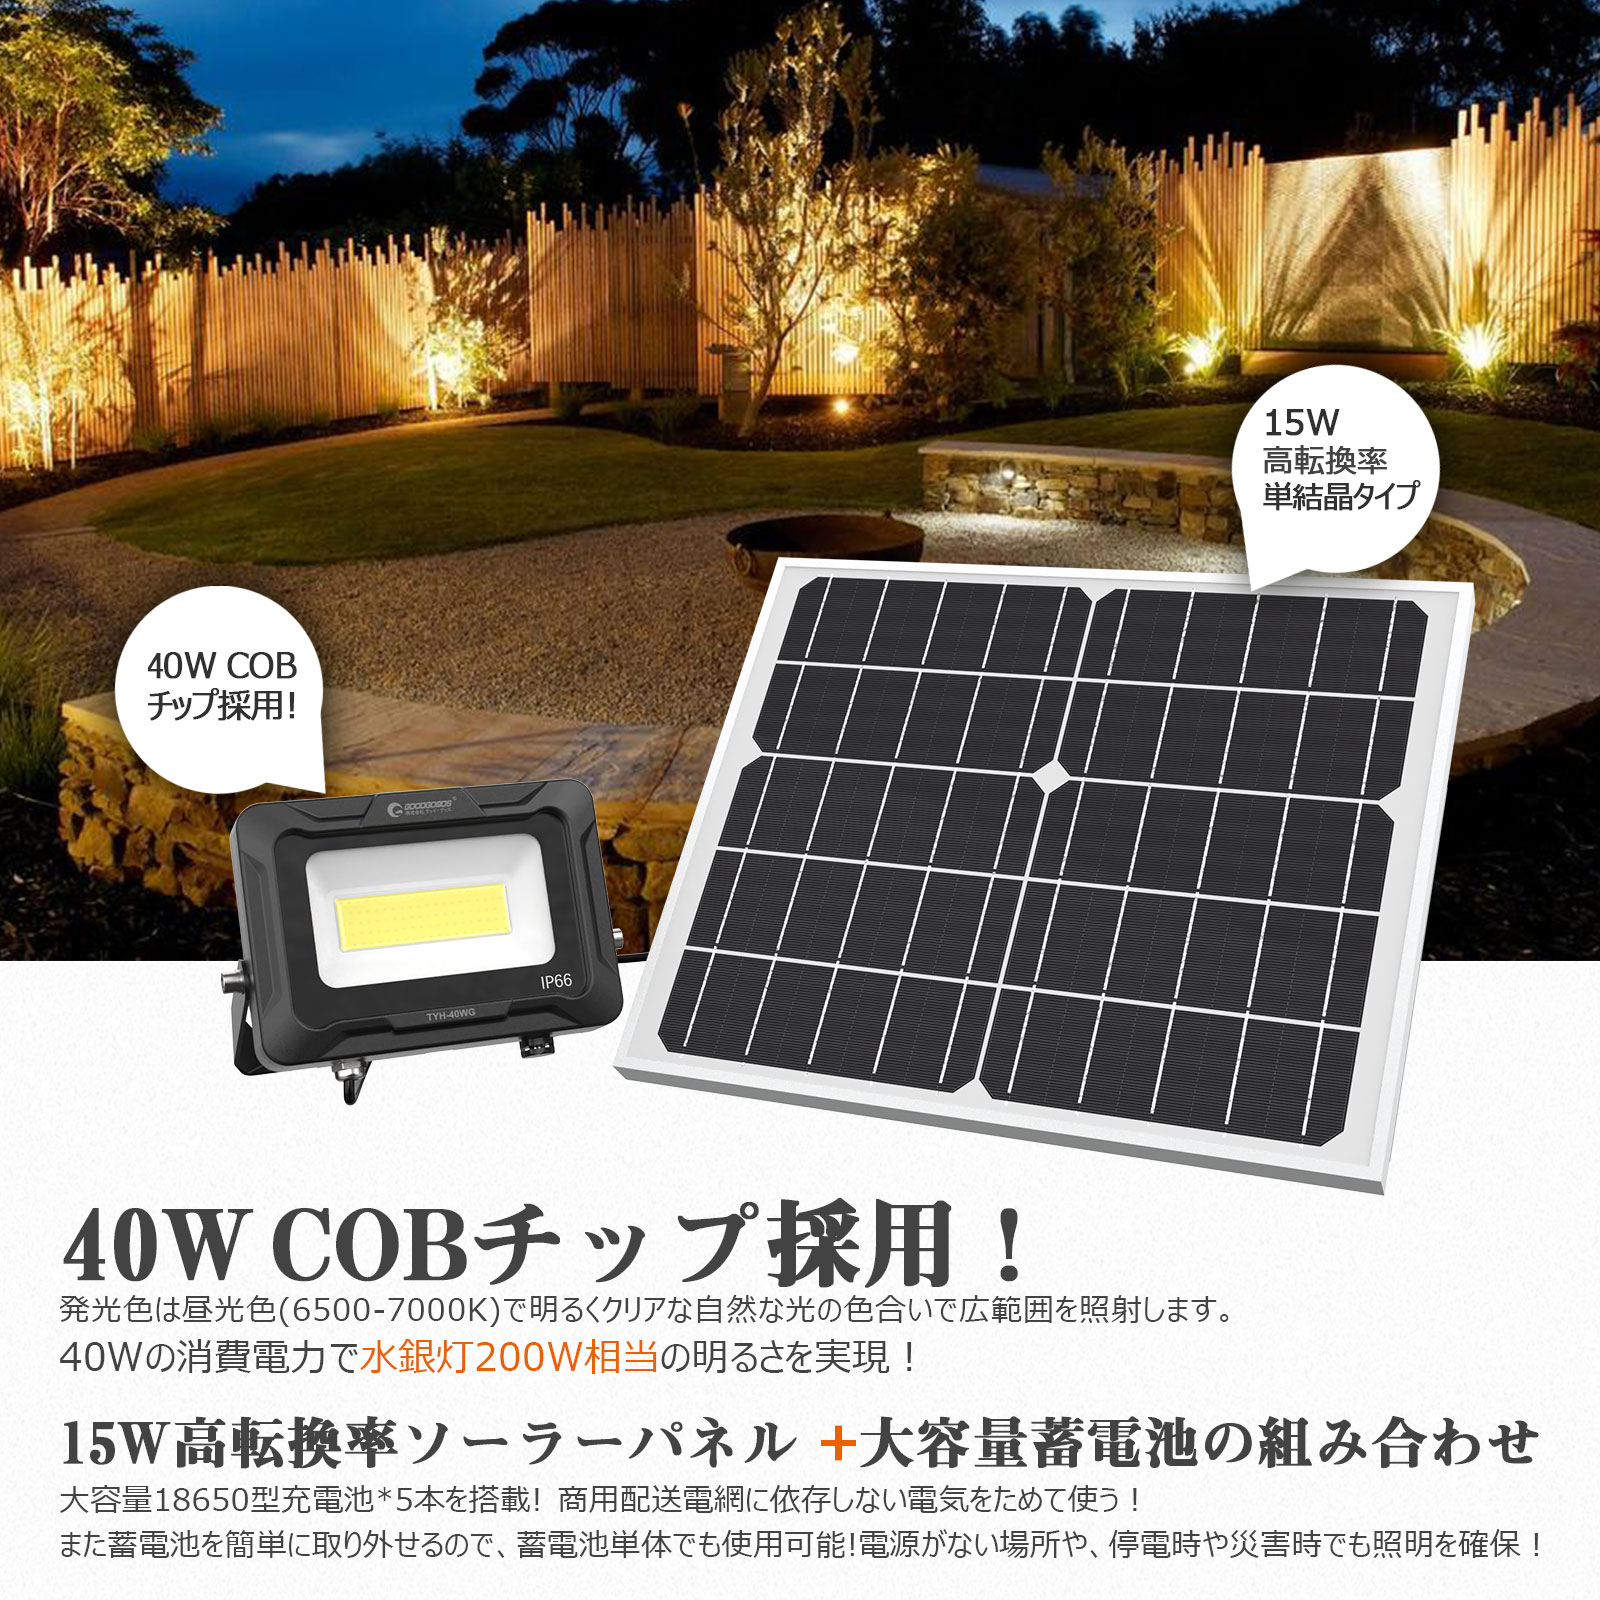 GOODGOODS LED ソーラーライト 40W 充電池5本搭載 防災グッズ 